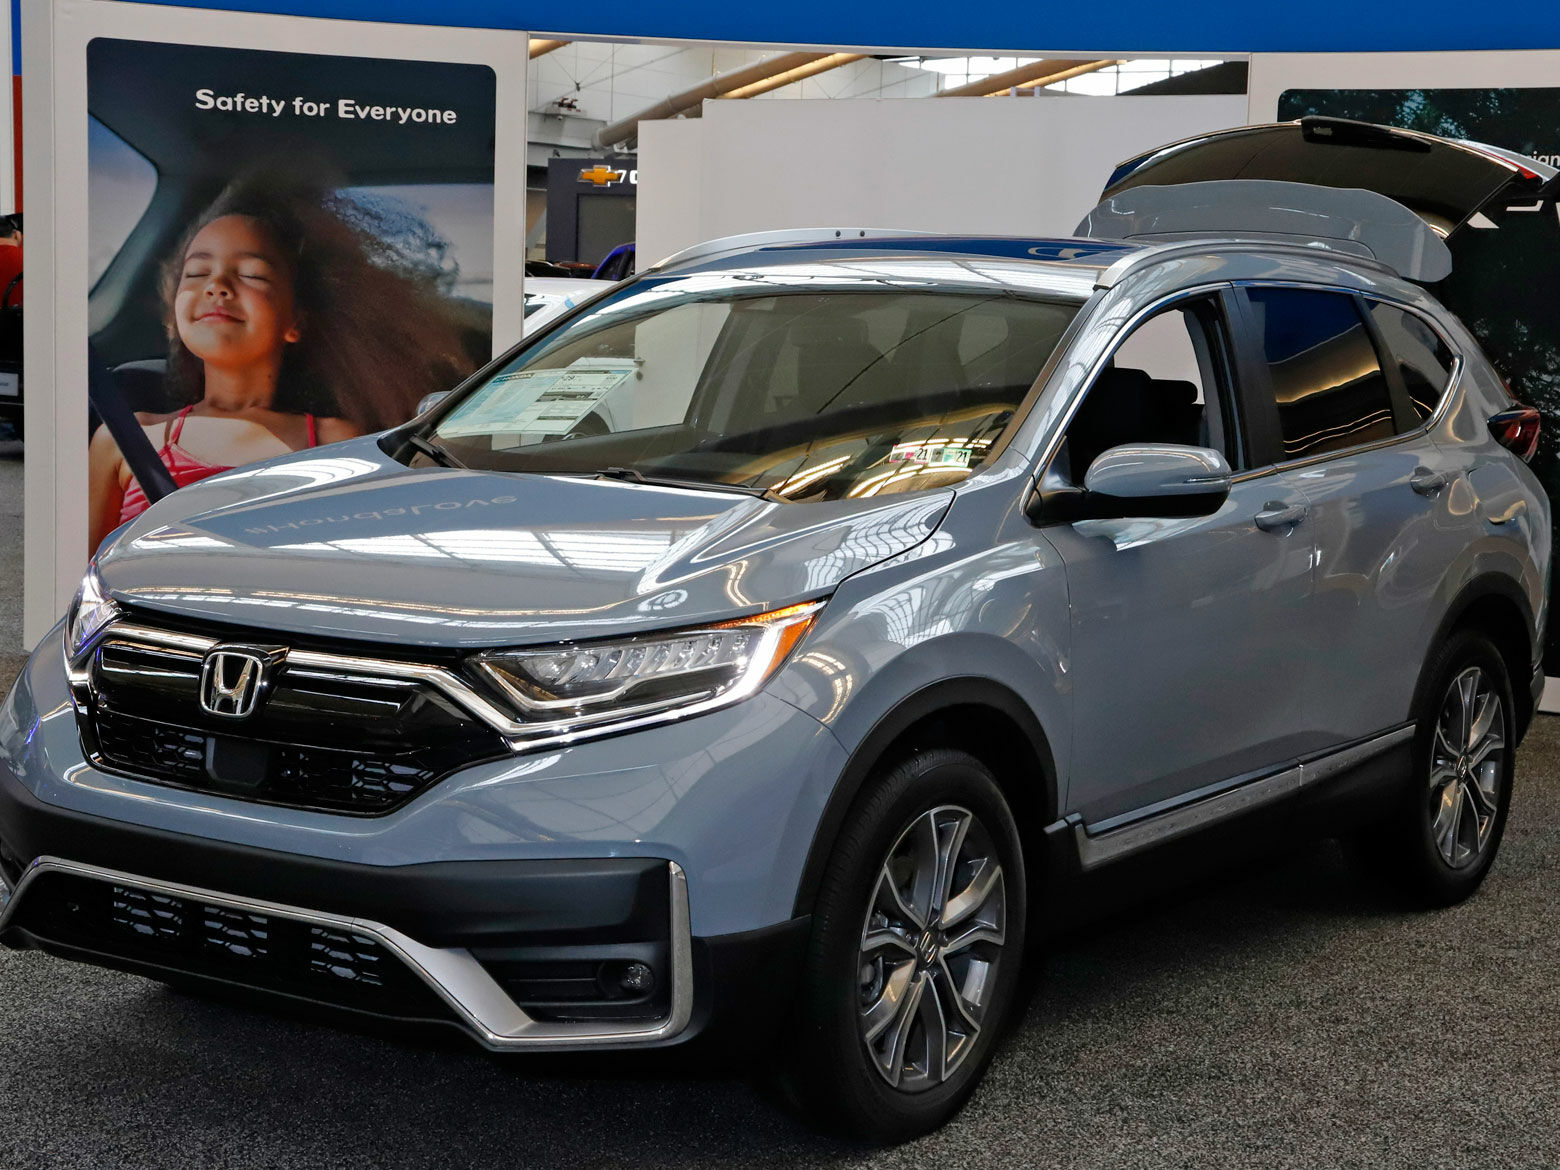 <h3><strong>2020 Honda CR-V</strong></h3>
<p><strong>Lease Deal: $310 per month for 36 months with zero due at signing and no first month’s payment</strong></p>
<p>If you’re in the market for a compact SUV, the <a href="https://cars.usnews.com/cars-trucks/honda/cr-v">2020 Honda CR-V</a> deserves a place on your shopping list. Not only is it the top-rated model in our ranking of compact SUVs, but it&#8217;s also the winner of our 2020 <a href="https://cars.usnews.com/cars-trucks/best-cars-for-the-money">Best Compact SUV for the Money</a> award.</p>
<p>This Fourth of July, Honda is offering a zero-down three-year lease deal on the CR-V, with no first month&#8217;s payment. Though the monthly payments are significantly higher than the lease deals they&#8217;re offering with cash due up-front, the zero-down lease will save you money in the long run. The lease deal is available on the two-wheel-drive CR-V LX and has a mileage cap of 36,000 miles.</p>
<p>For many compact SUV shoppers, the CR-V checks every box on their wish list. It features a roomy interior, excellent fuel economy, and plenty of cargo room for weekend adventures. For 2020, Honda made the Honda Sensing Suite of advanced safety and driver assistance features standard. Now every CR-V comes with automatic emergency braking, adaptive cruise control, and lane-keeping assist.</p>
